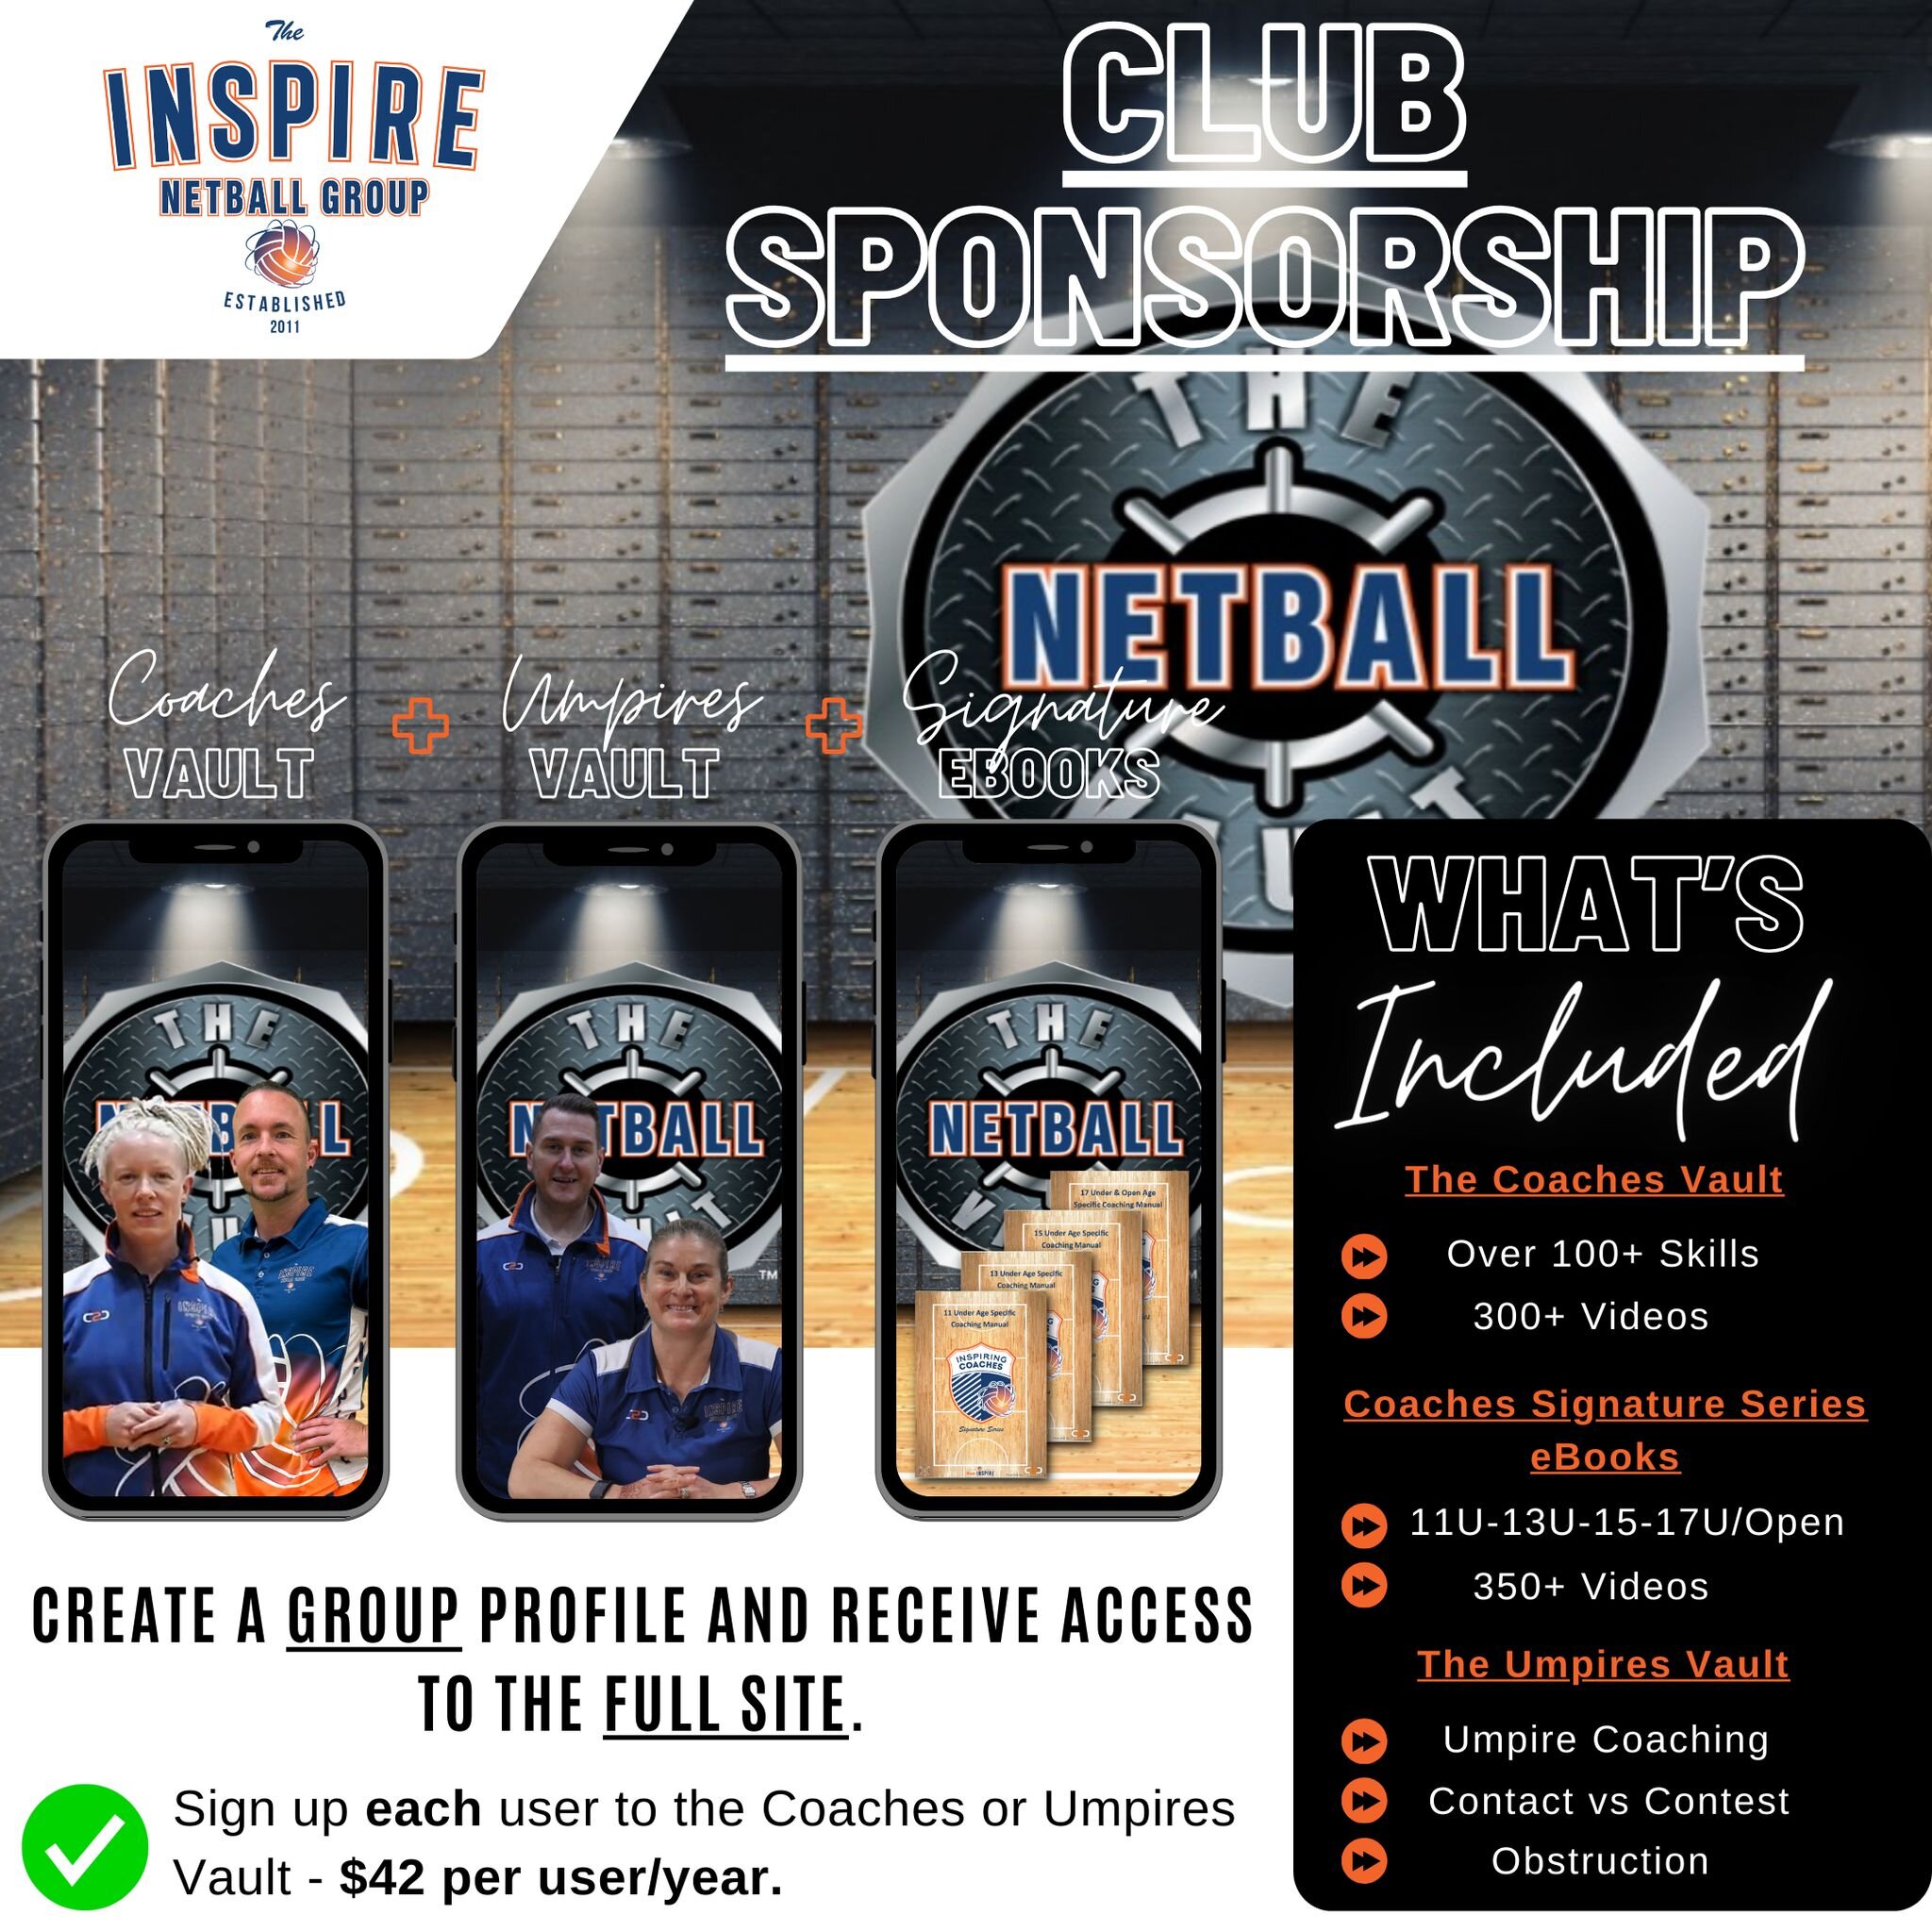 CLUB SPONSORSHIP 📣🏐
.
Gain access to the WHOLE NETBALL VAULT SITE 🔥
.
👇🏽 HERES HOW 👇🏽
 1. Create a group profile for your club.
 2. Sign up each user to either the COACHES or UMPIRES vault (minimum group of 5 users).
 3. At $42 per user/year y